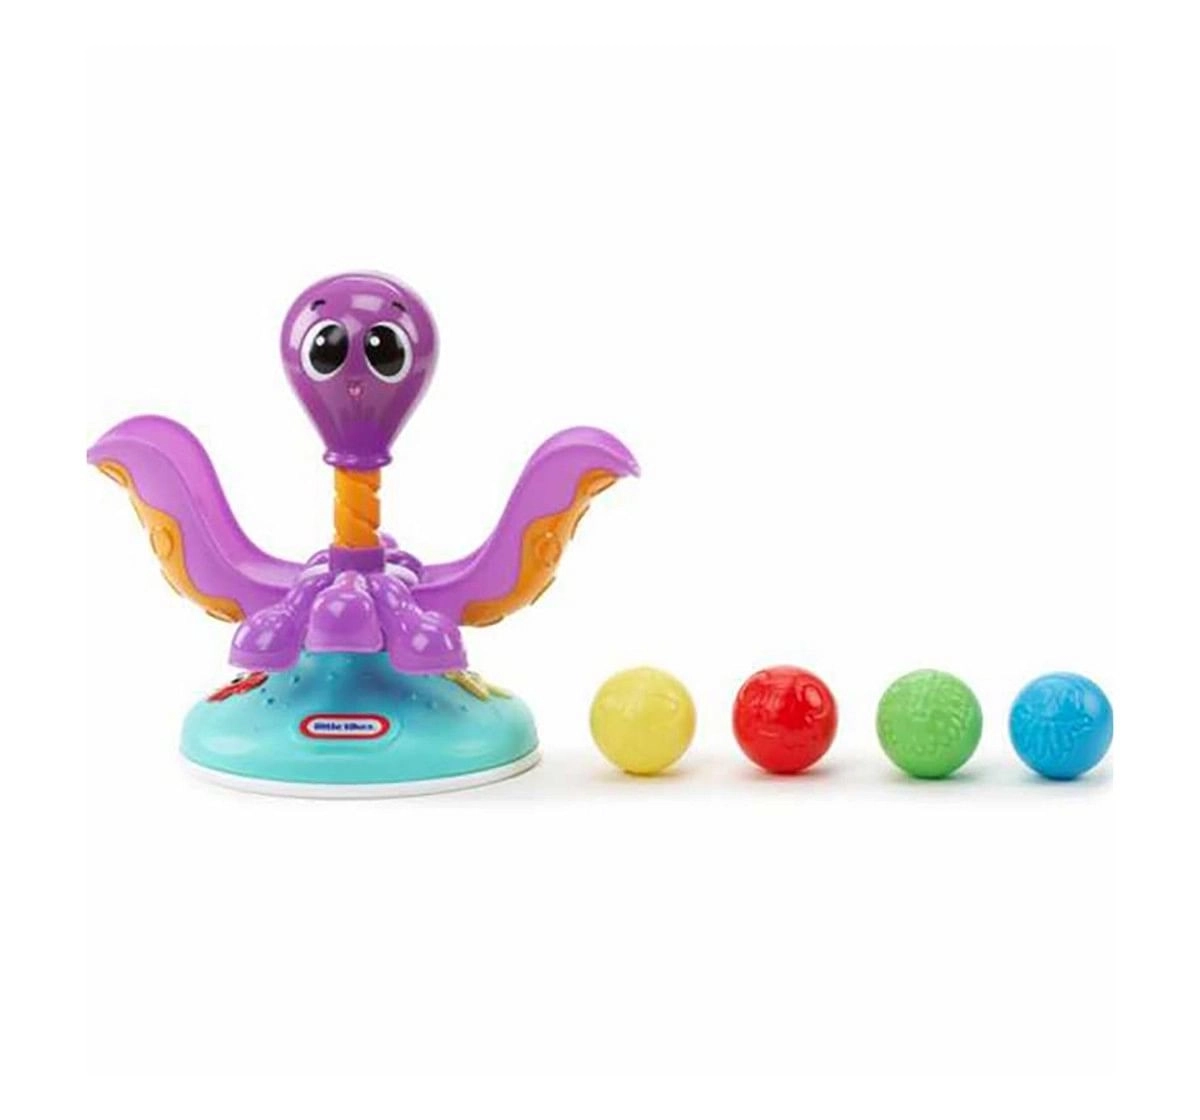 Little Tikes Ball Chase Octopus, Early Learner Toys for Kids age 6M+ 